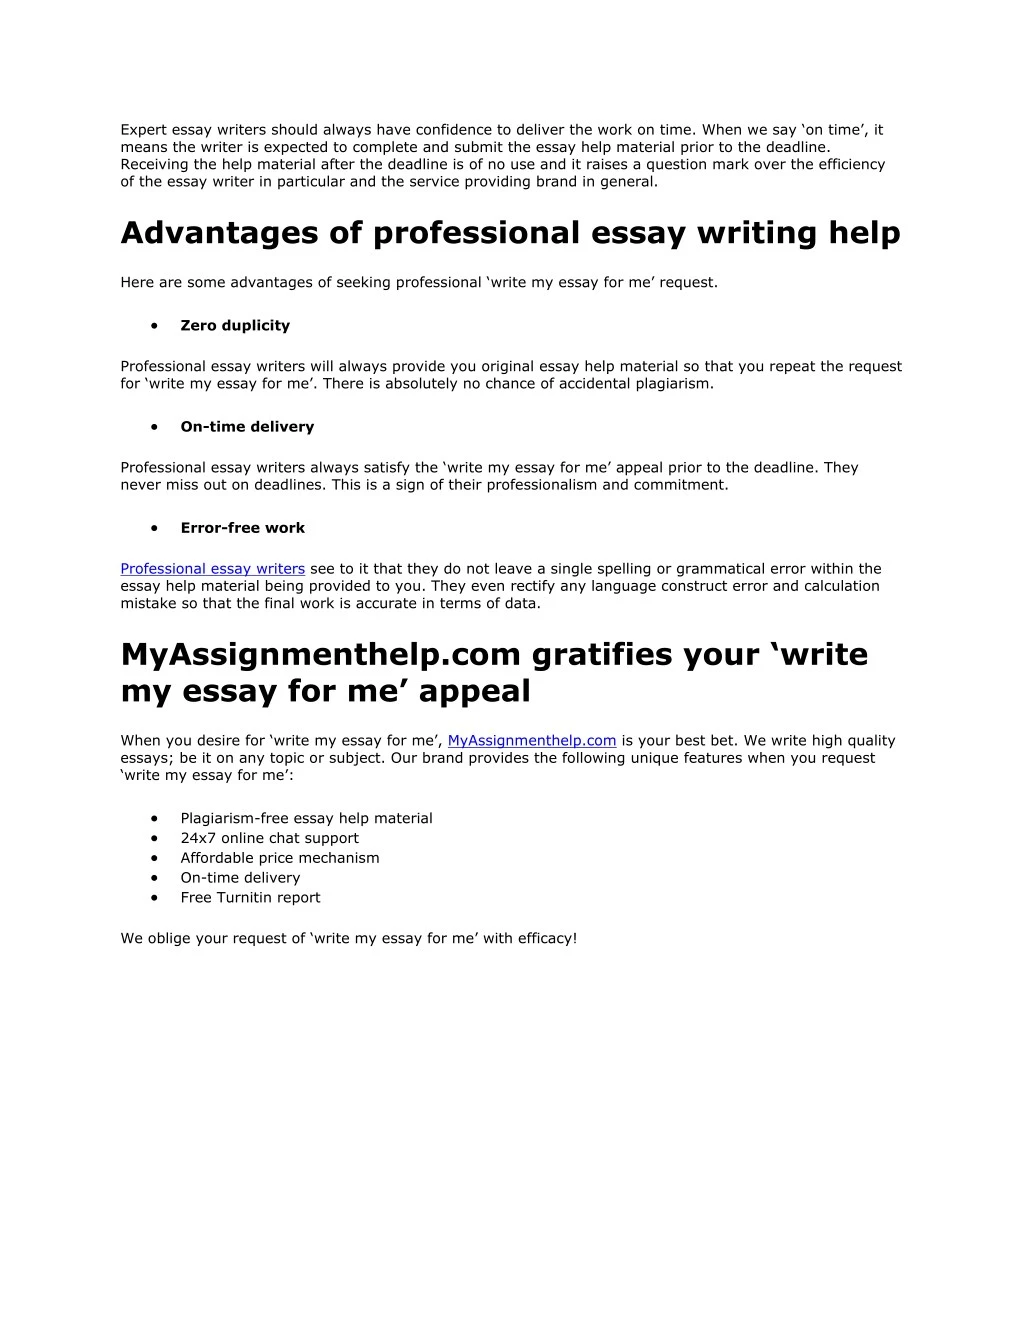 Improve Your essay writing service In 4 Days